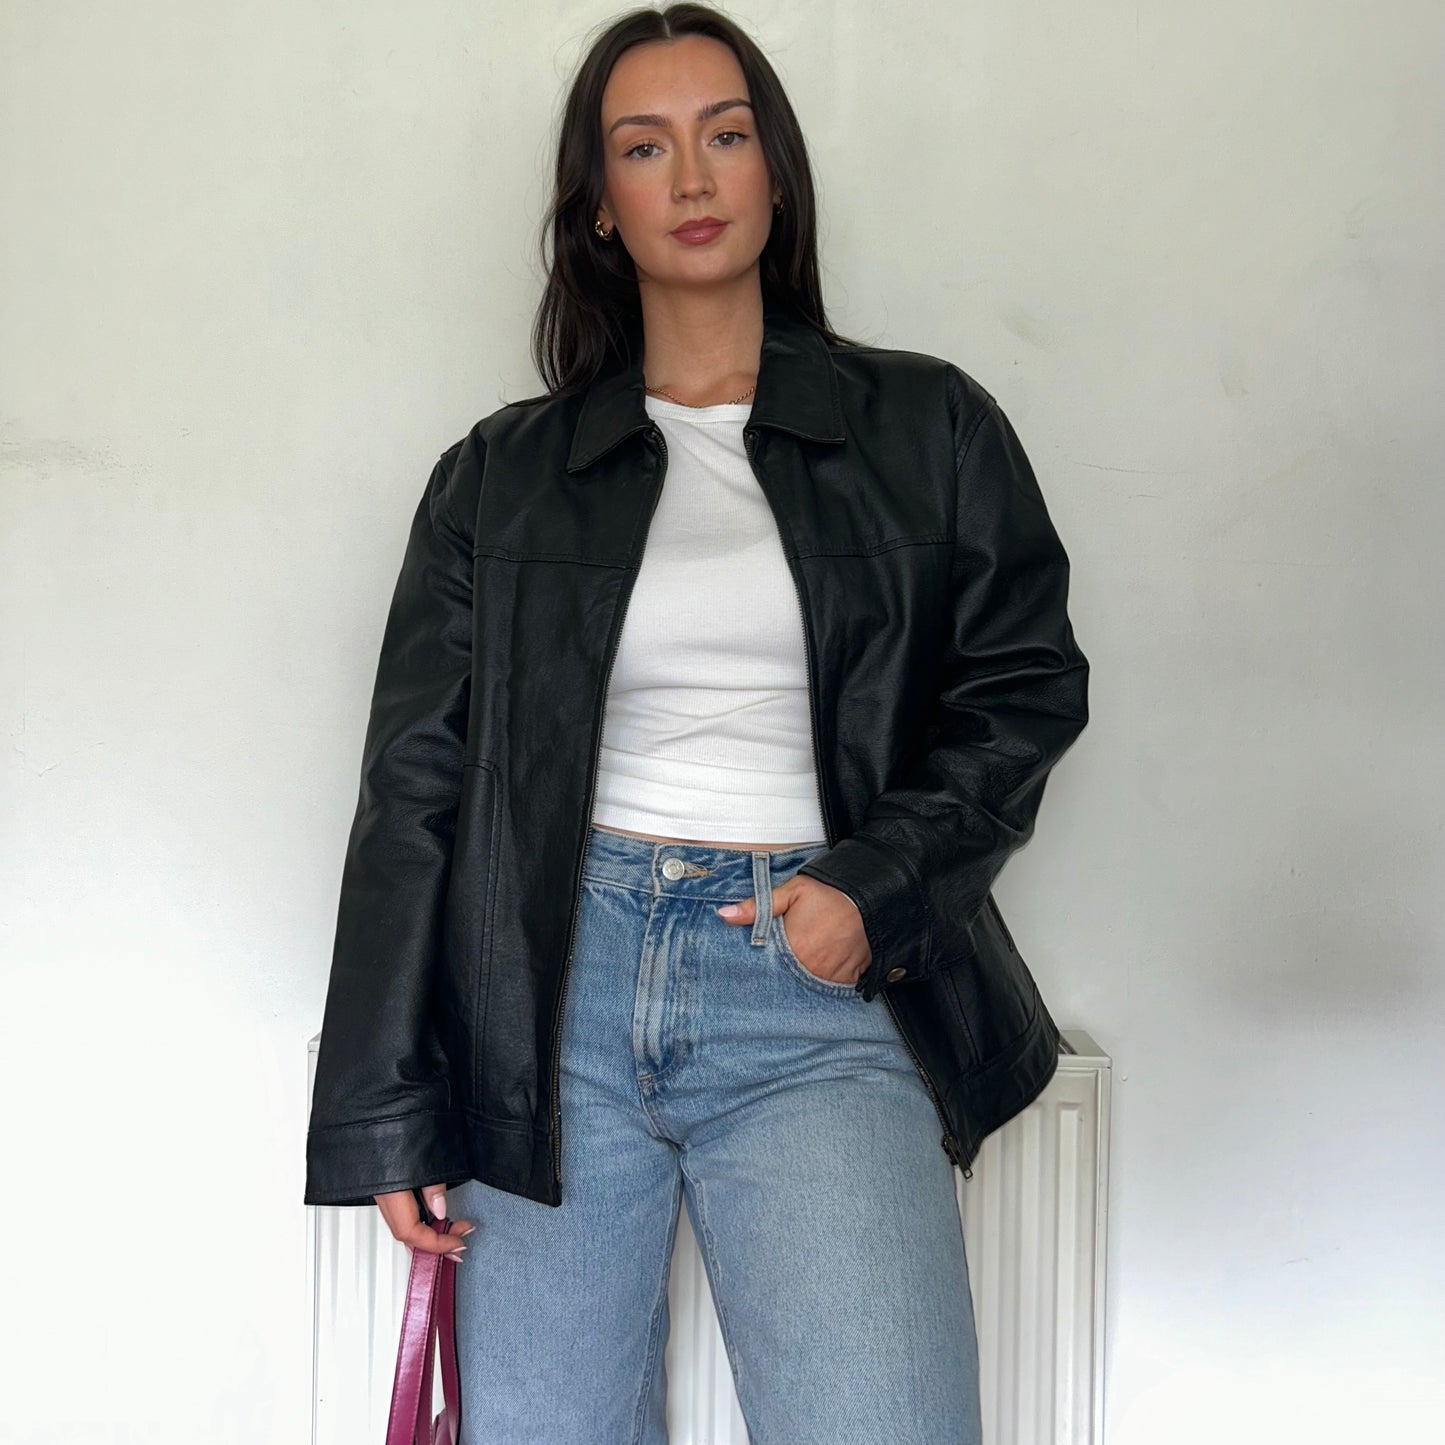 black leather vintage bomber jacket shown on a model wearing a white top and blue jeans 